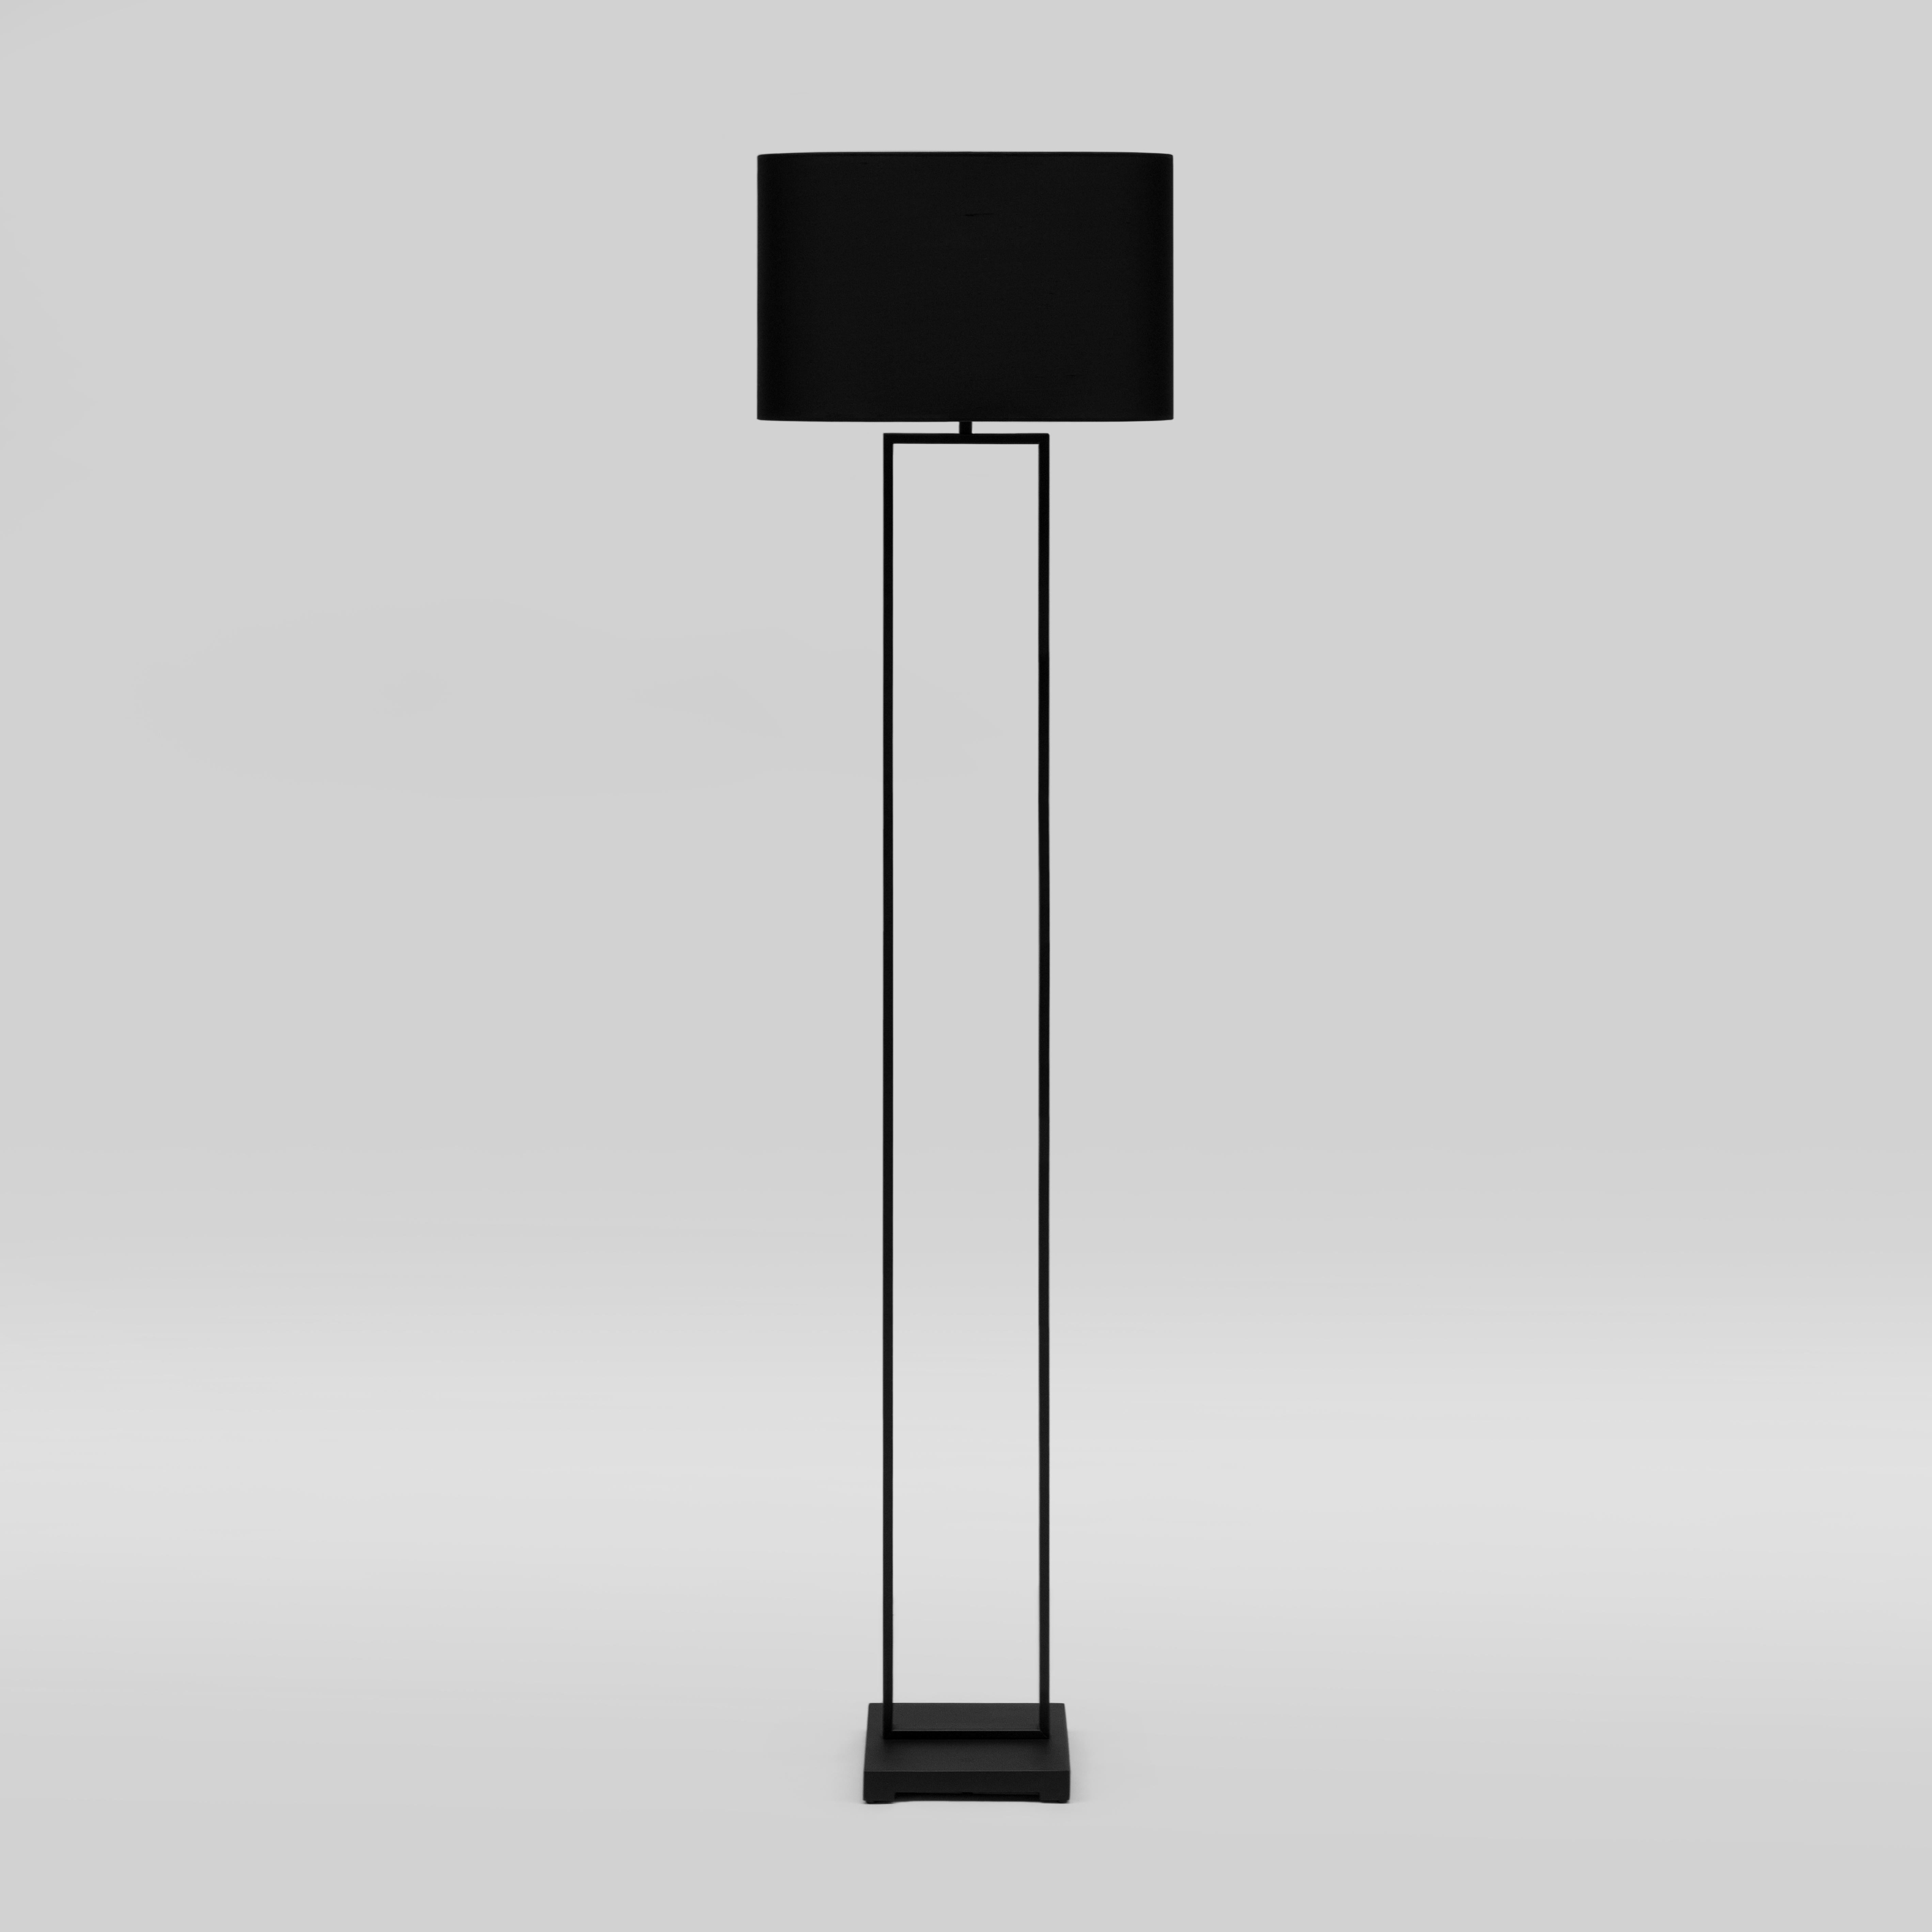 Floor lamp designed by Peter Ghyczy in 2010.
Manufactured by Ghyczy (Netherlands)

Using sandcasted metal, this lampshade features perfectly symmetrical beams at its base. Minimal in look, at first glance this lamp appears to be levitating, yet is